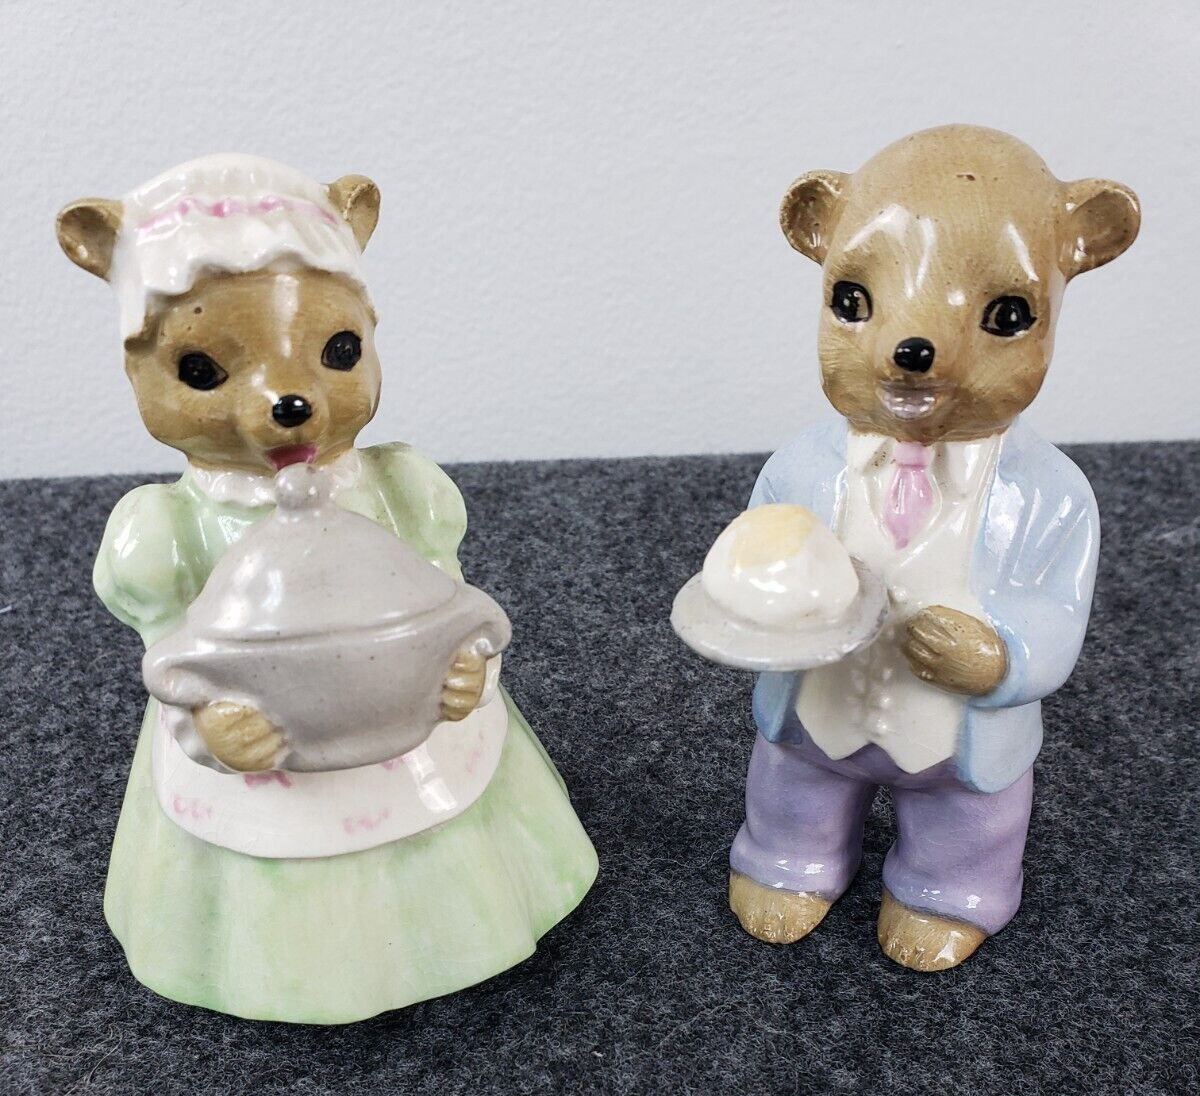 Vintage Fine A Quality The Three Bears Ceramic Figurines 1950s Japan 4in